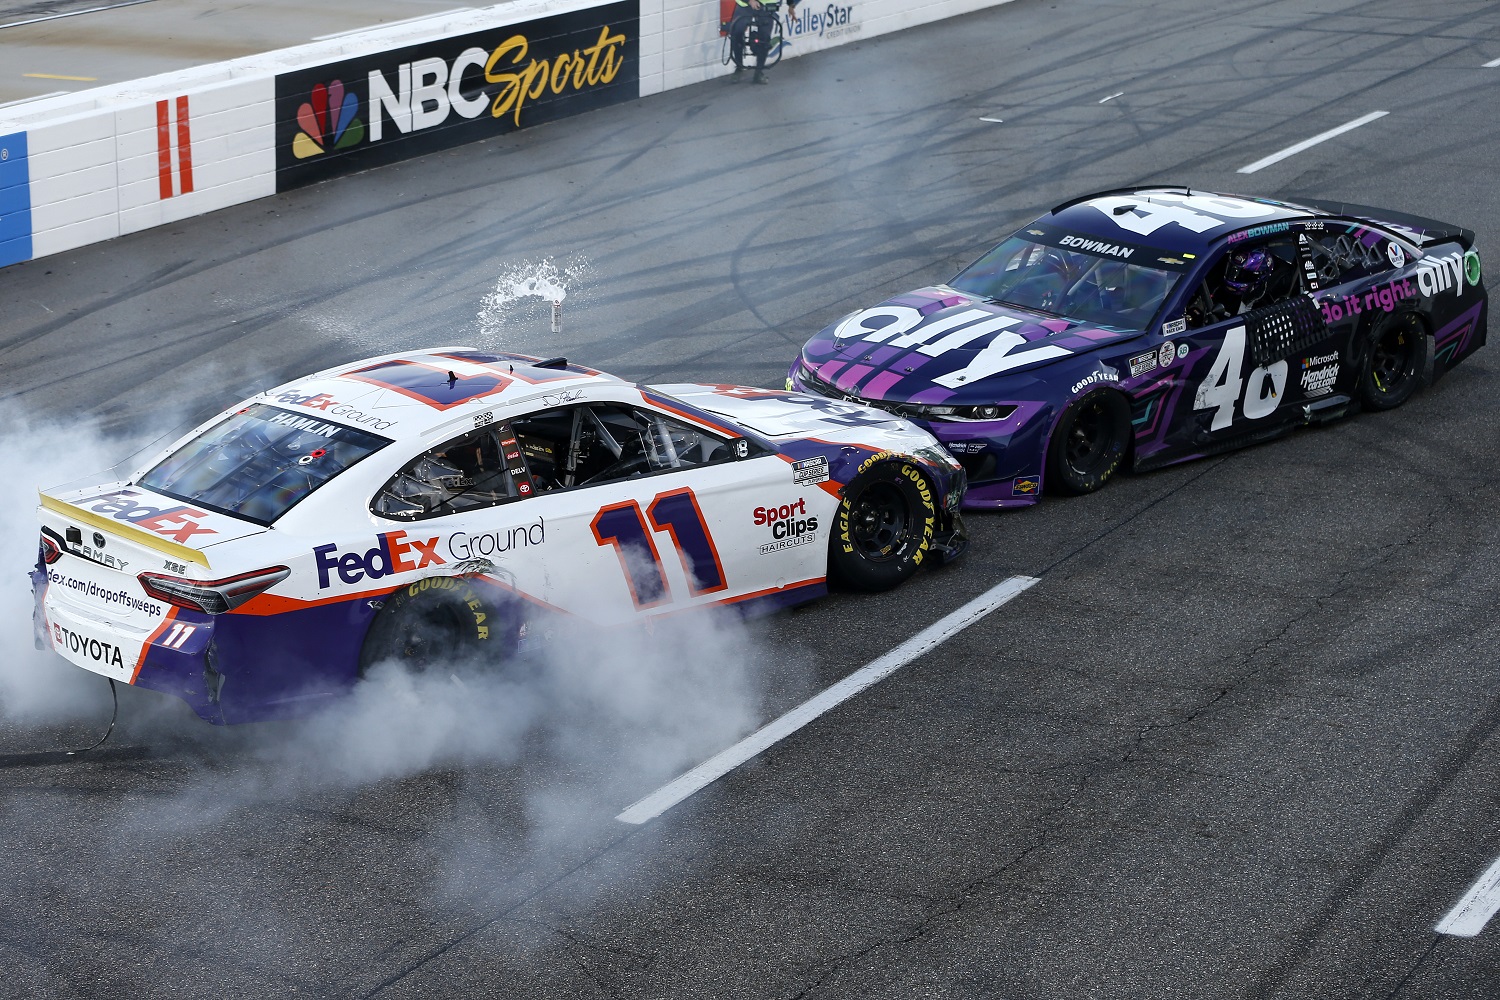 Denny Hamlin, driver of the No. 11 Toyota, impedes Alex Bowman's celebration after winning the NASCAR Cup Series Xfinity 500 at Martinsville Speedway on Oct. 31, 2021.